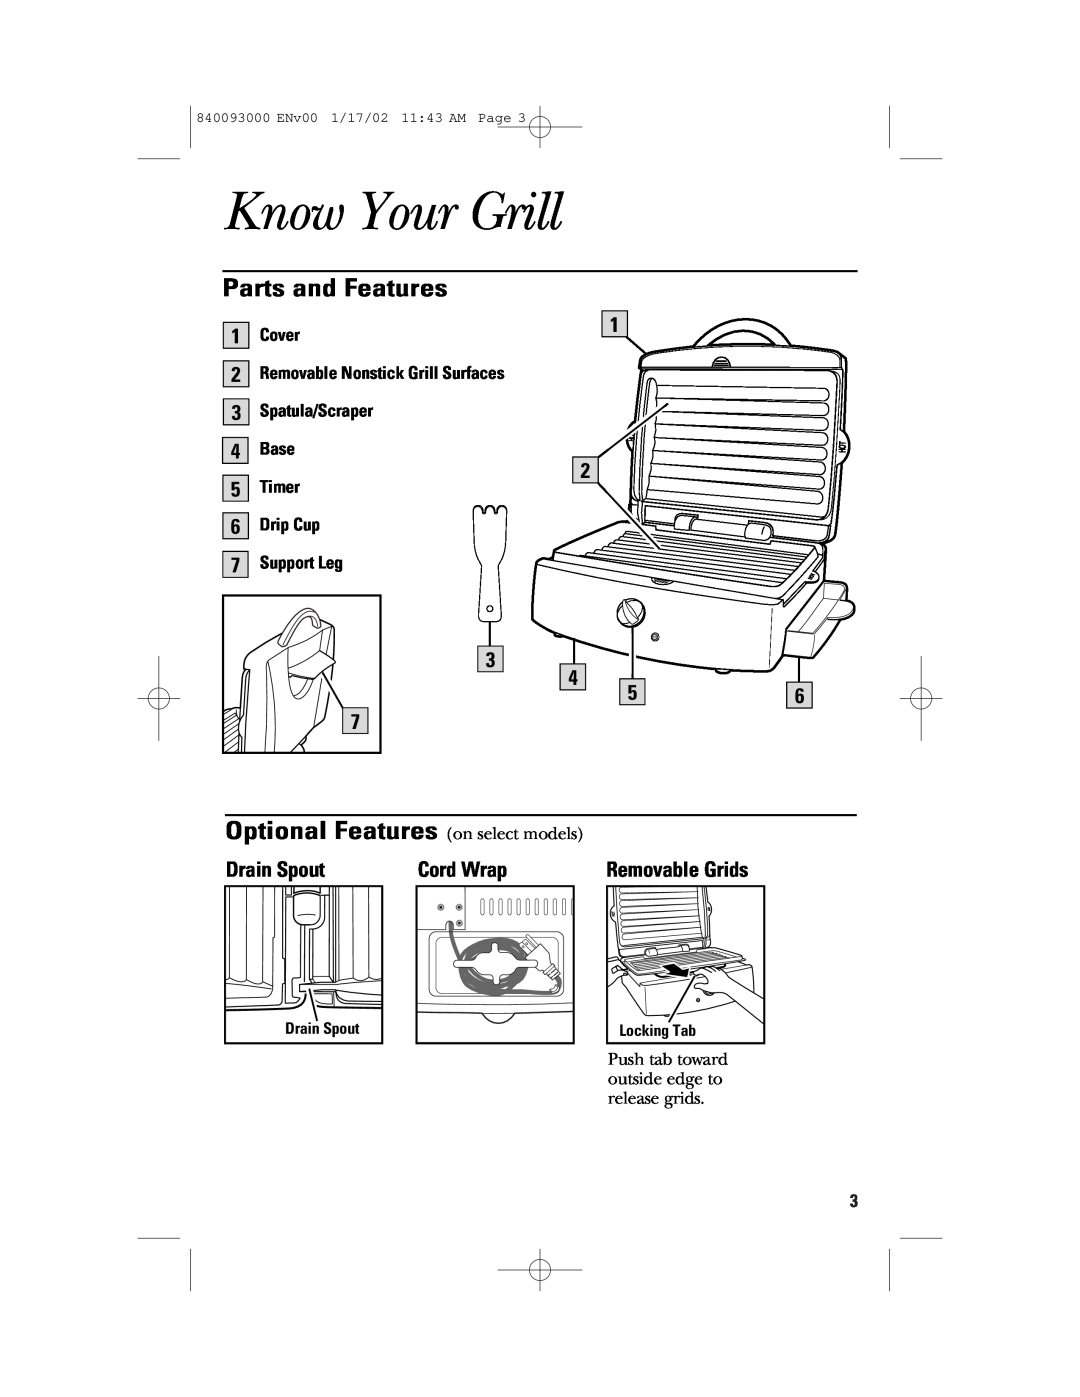 GE 106668 Know Your Grill, Parts and Features, Optional Features on select models, Drain Spout, Removable Grids, Cover 